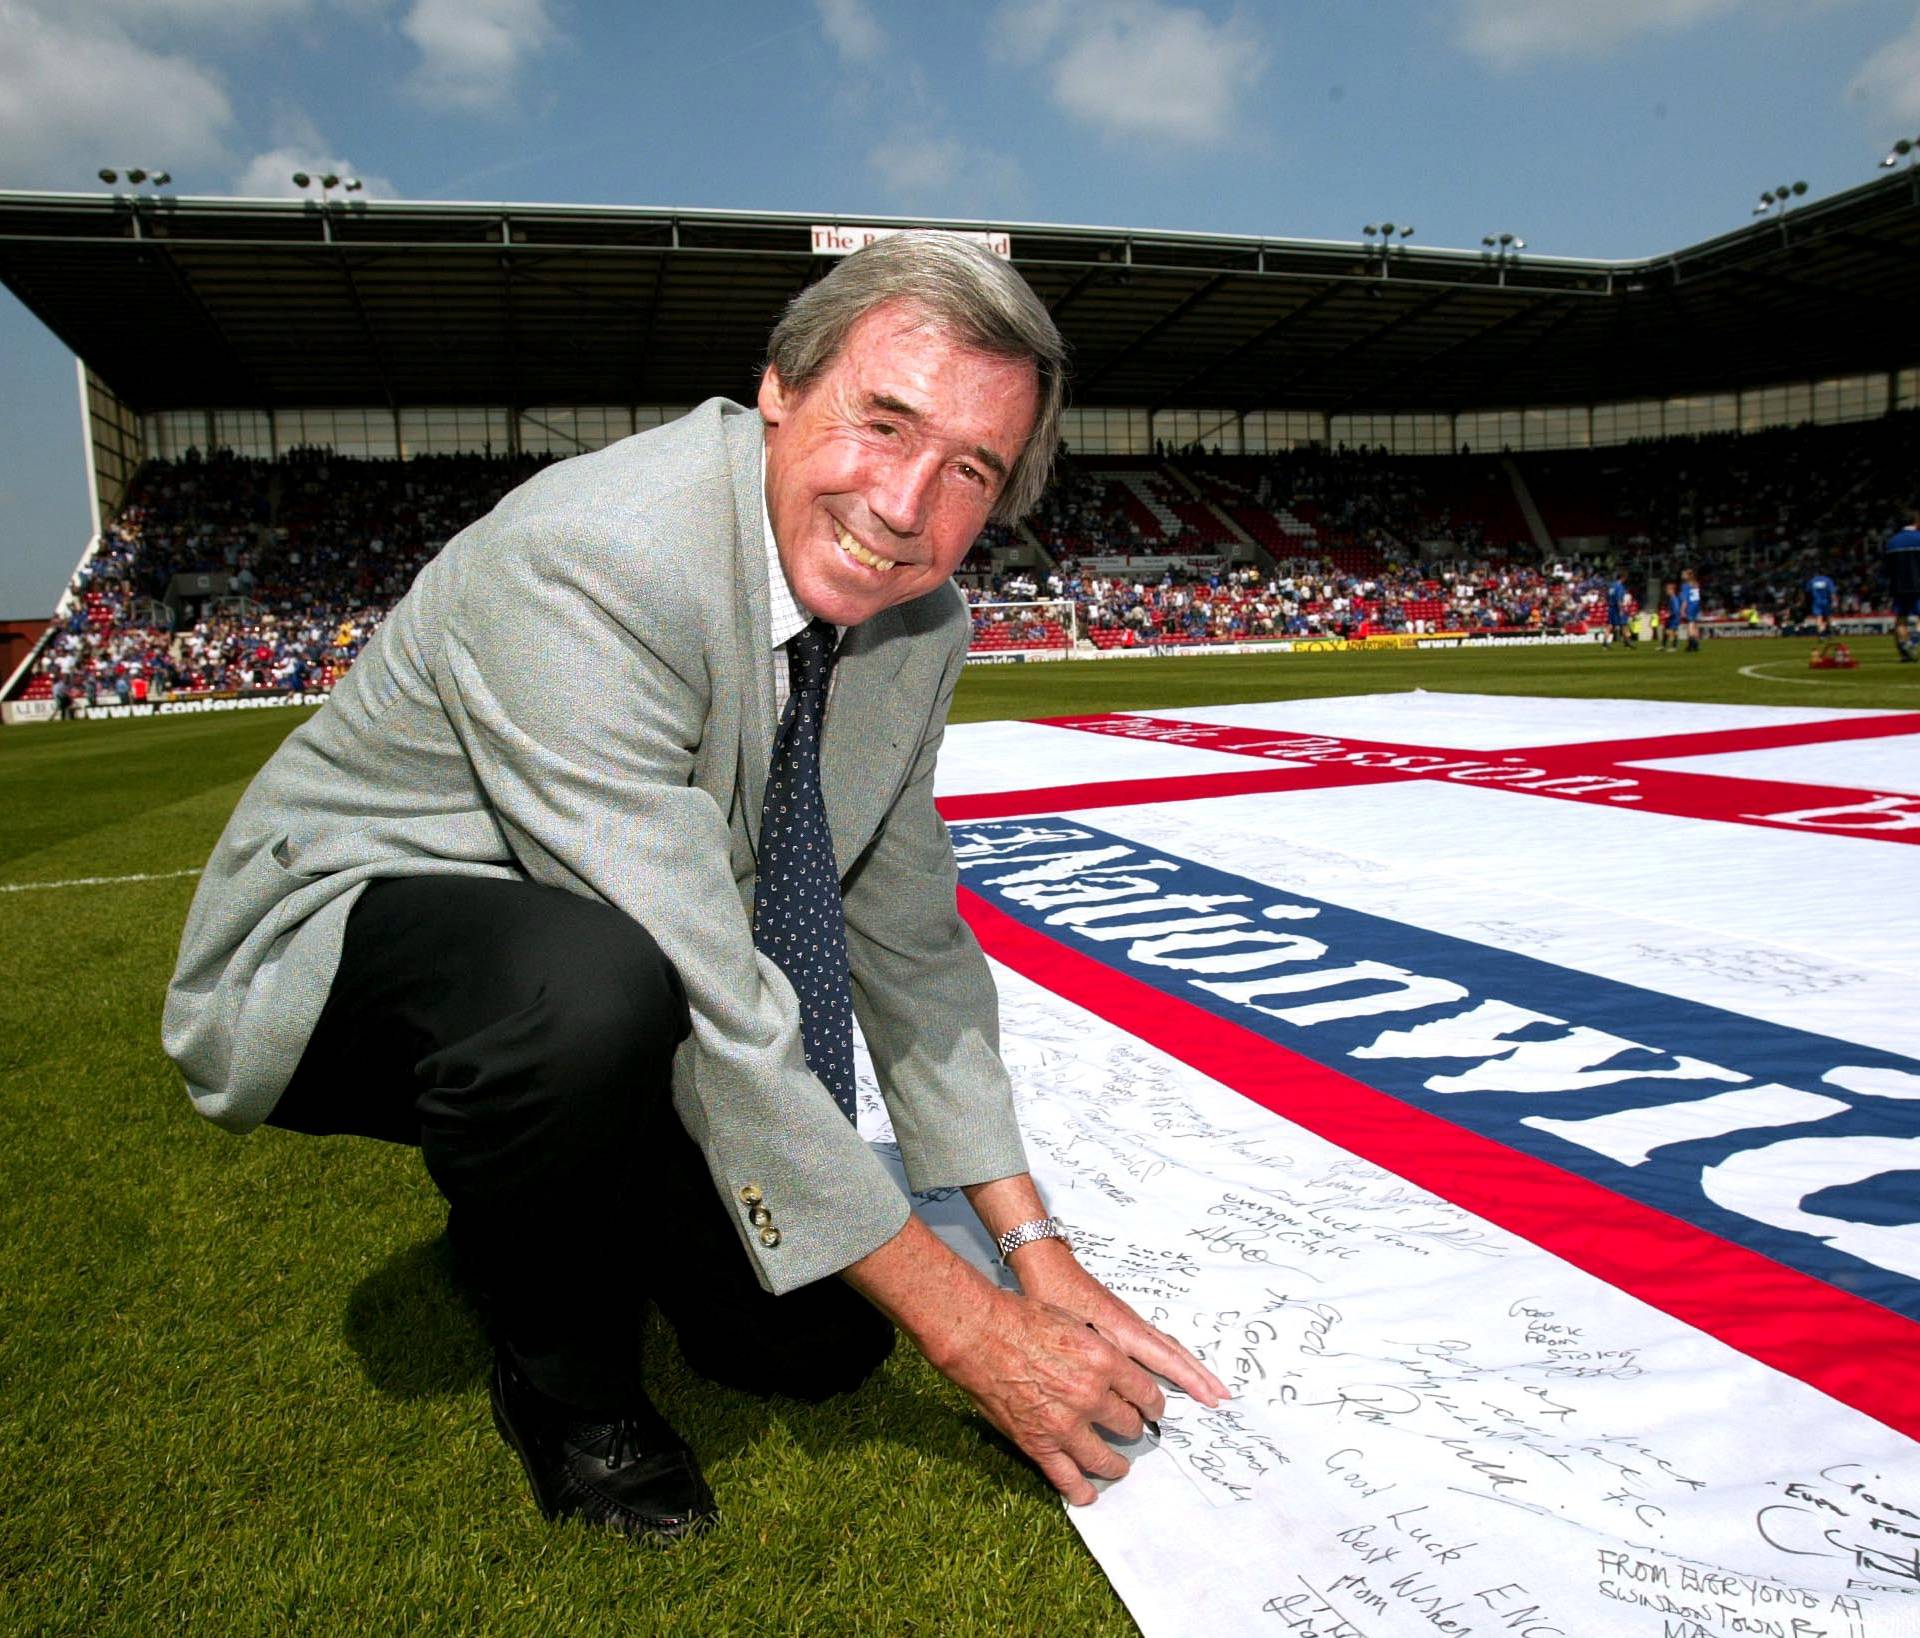 FILE PHOTO: Giant Nationwide flag which is being signed by Gordon Banks for England during Euro 2004